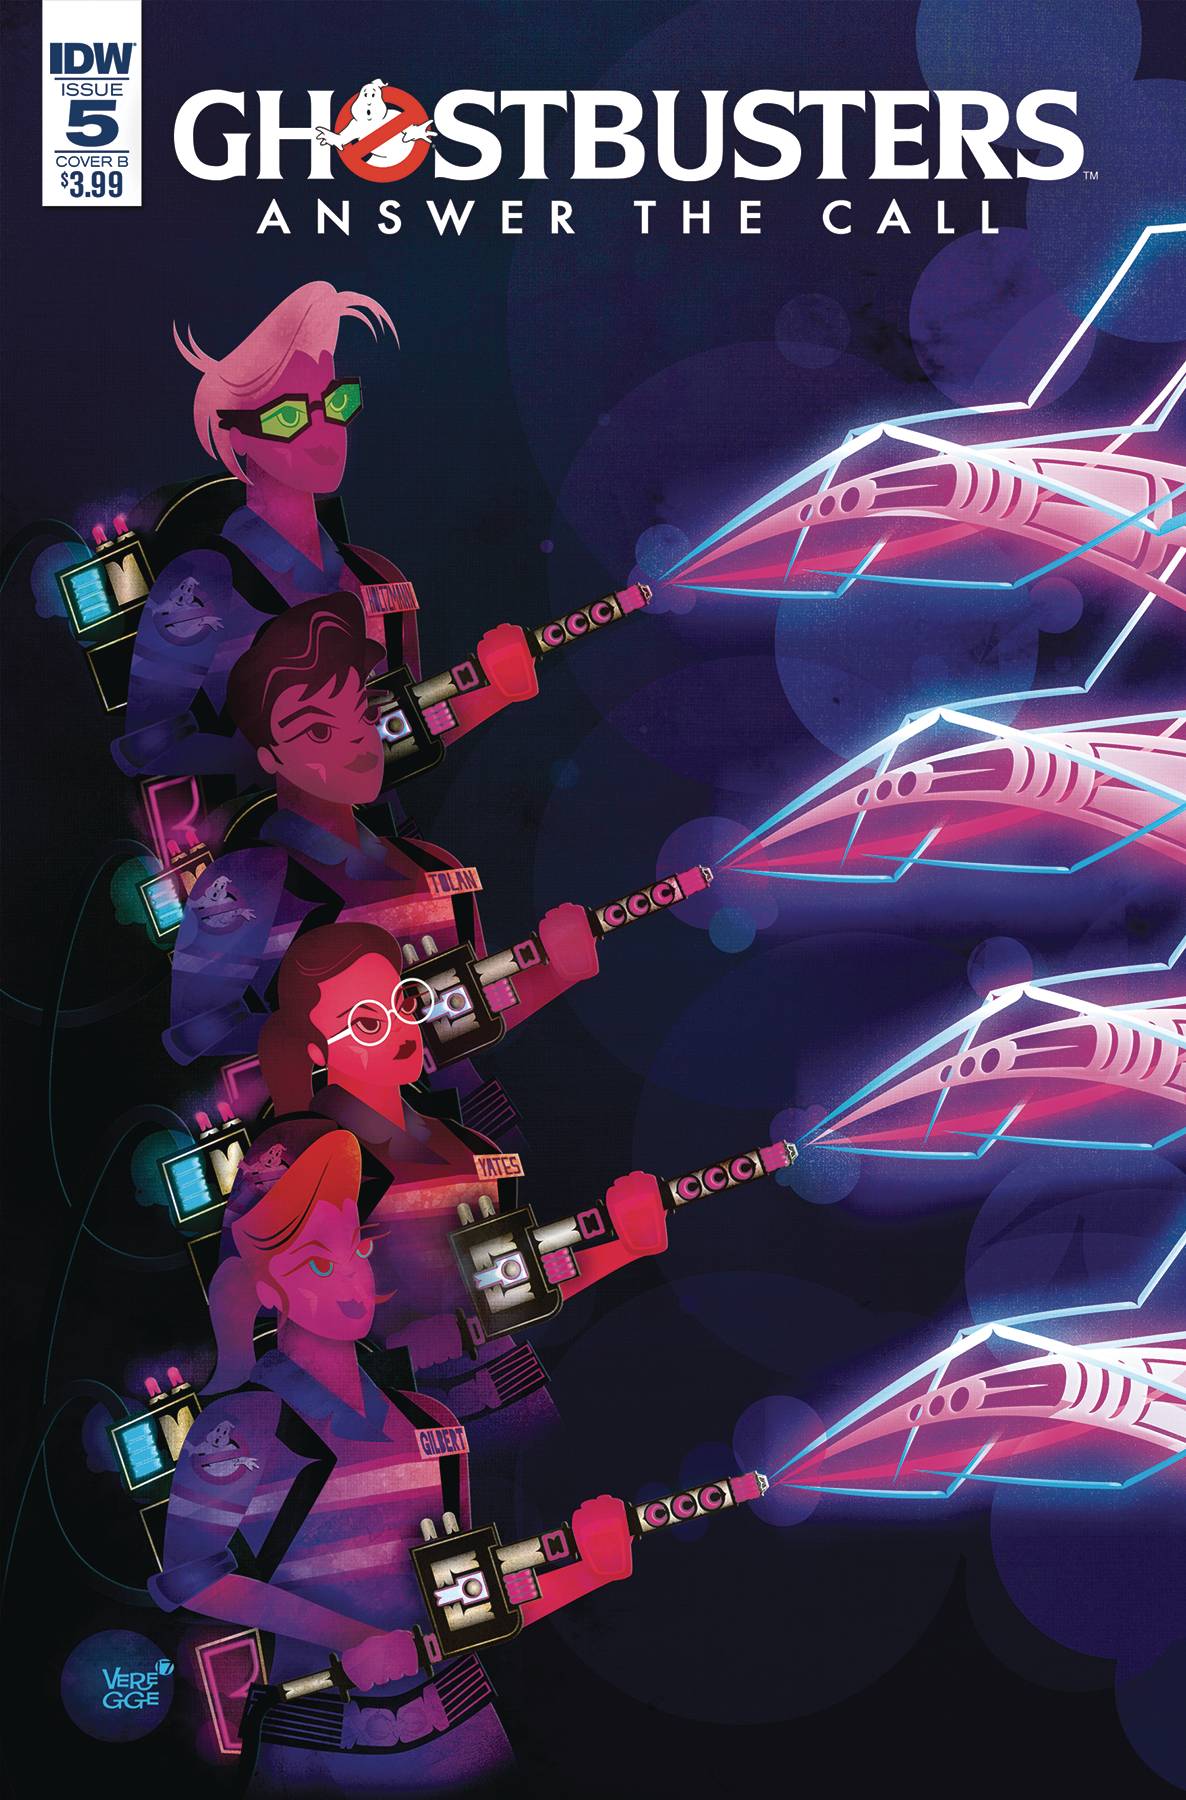 Ghostbusters Answer The Call #5 Cover B Veregge